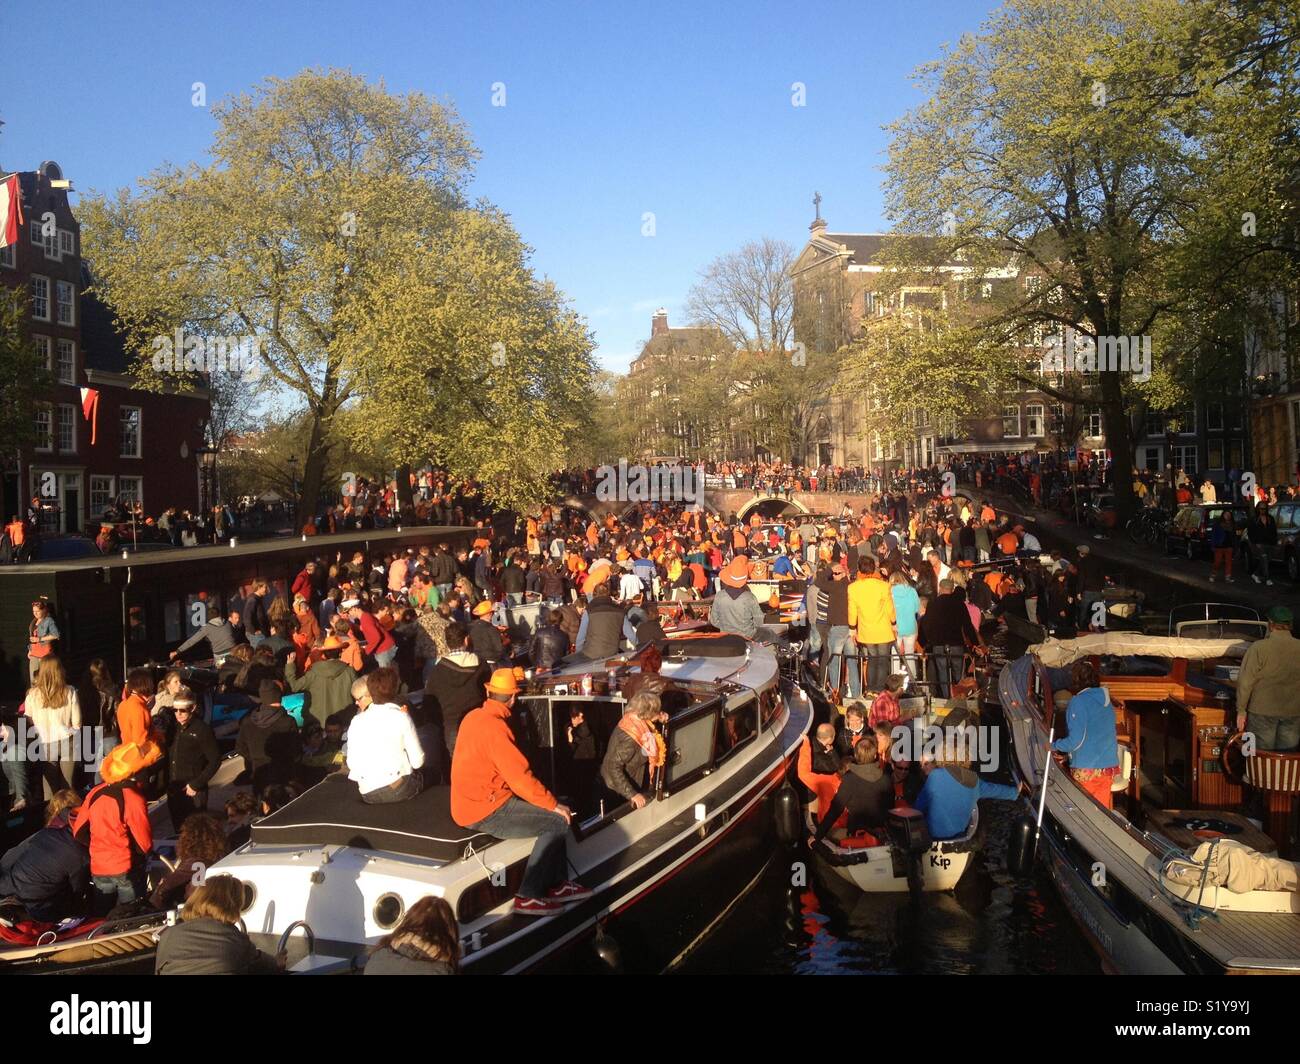 Amsterdam during Koningsdag, a Dutch national holiday. On the canals there are many small boats with people partying on them. Stock Photo